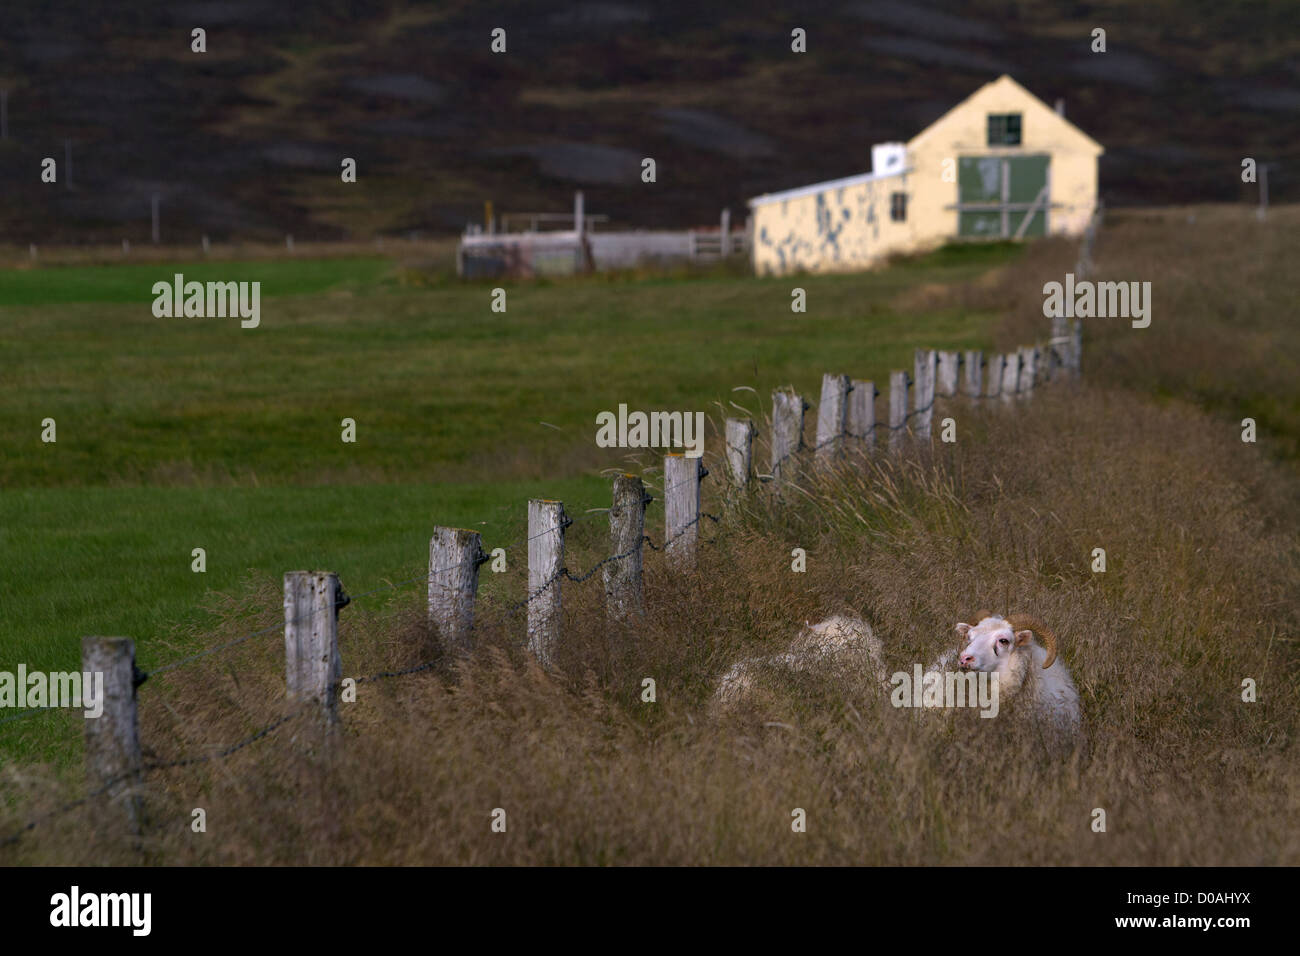 ICELANDIC SHEEP FARM IN THE BACKGROUND NORTHERN ICELAND EUROPE Stock Photo